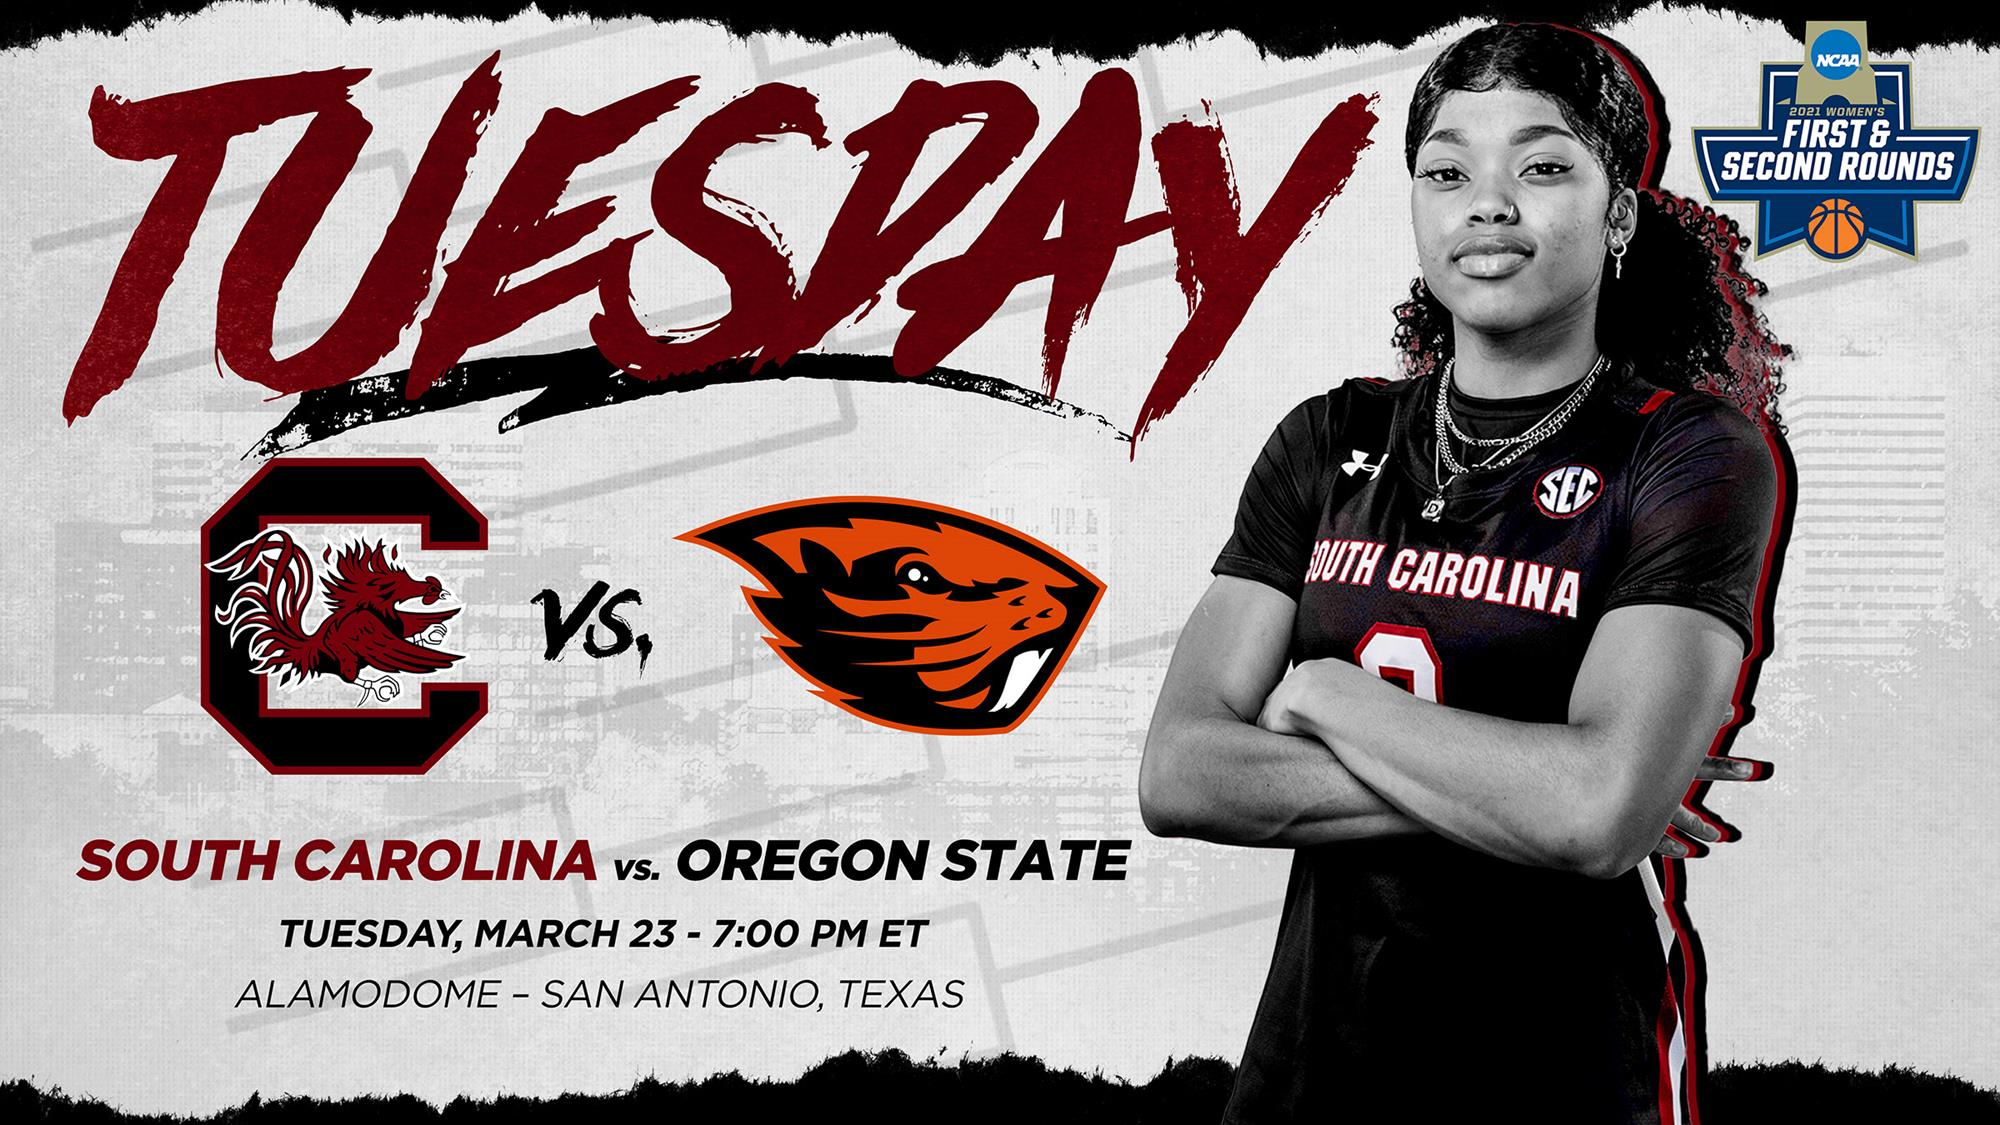 Gamecocks vs. Oregon State in NCAA 2nd Round Tuesday